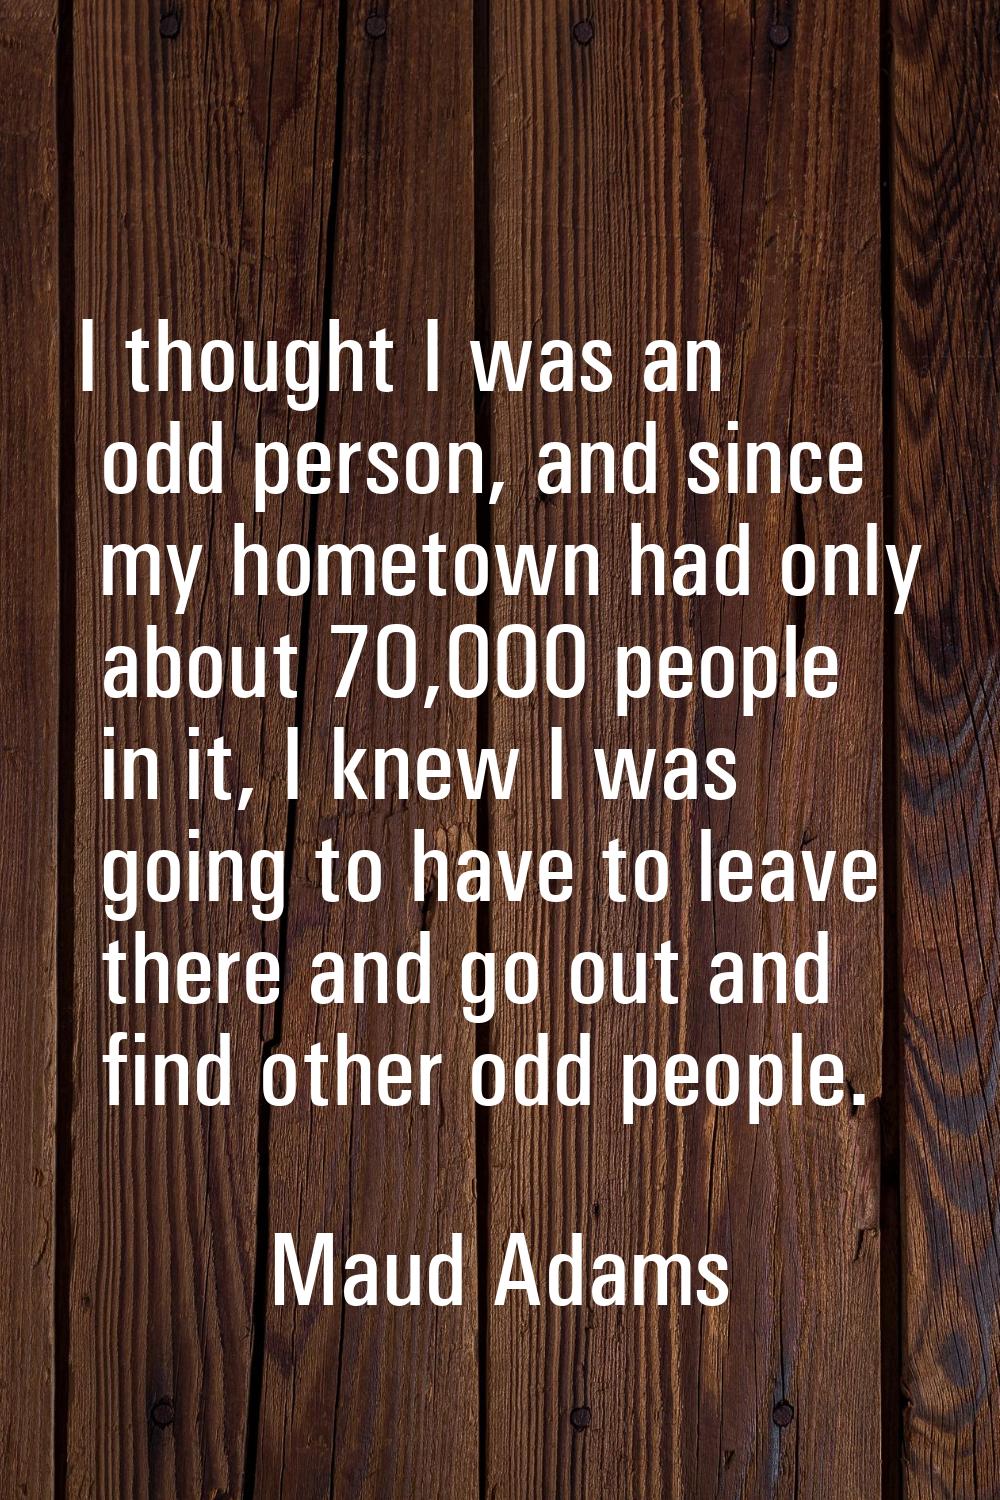 I thought I was an odd person, and since my hometown had only about 70,000 people in it, I knew I w